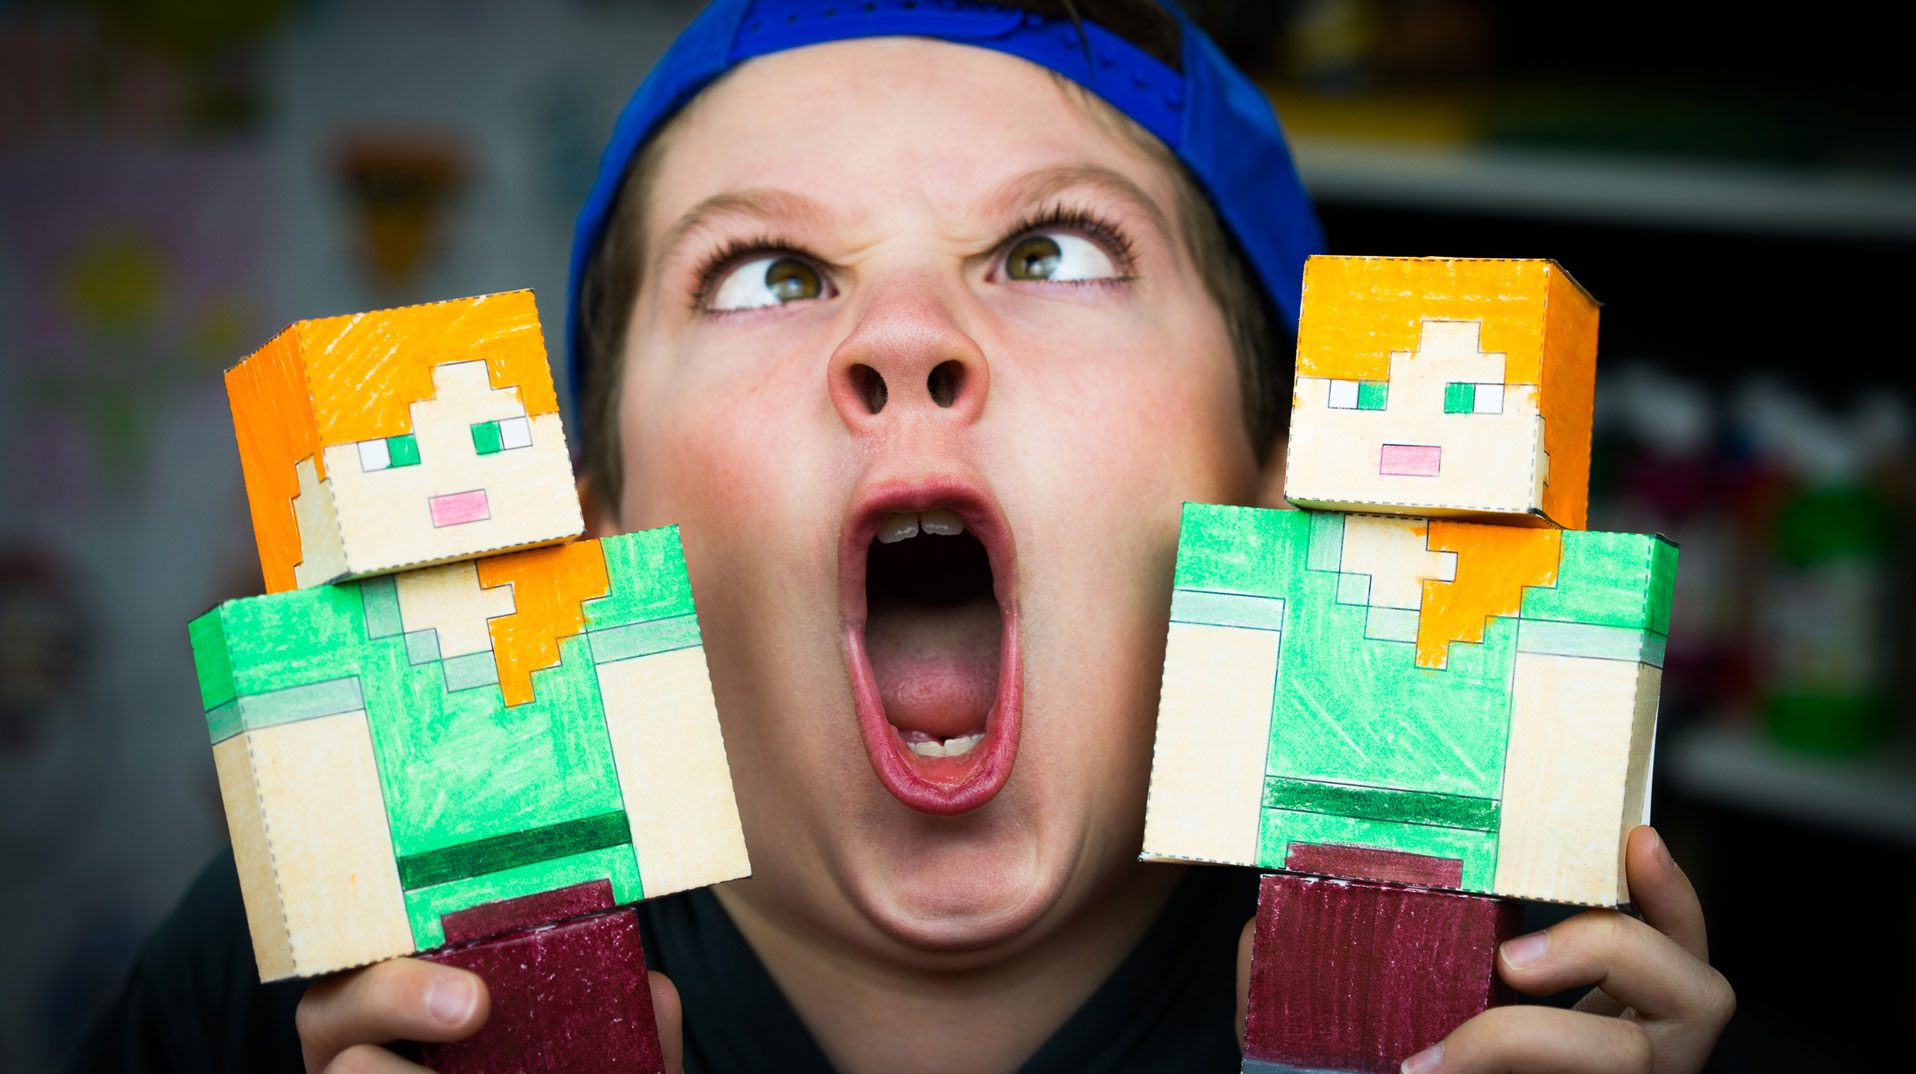 minecraft printables characters